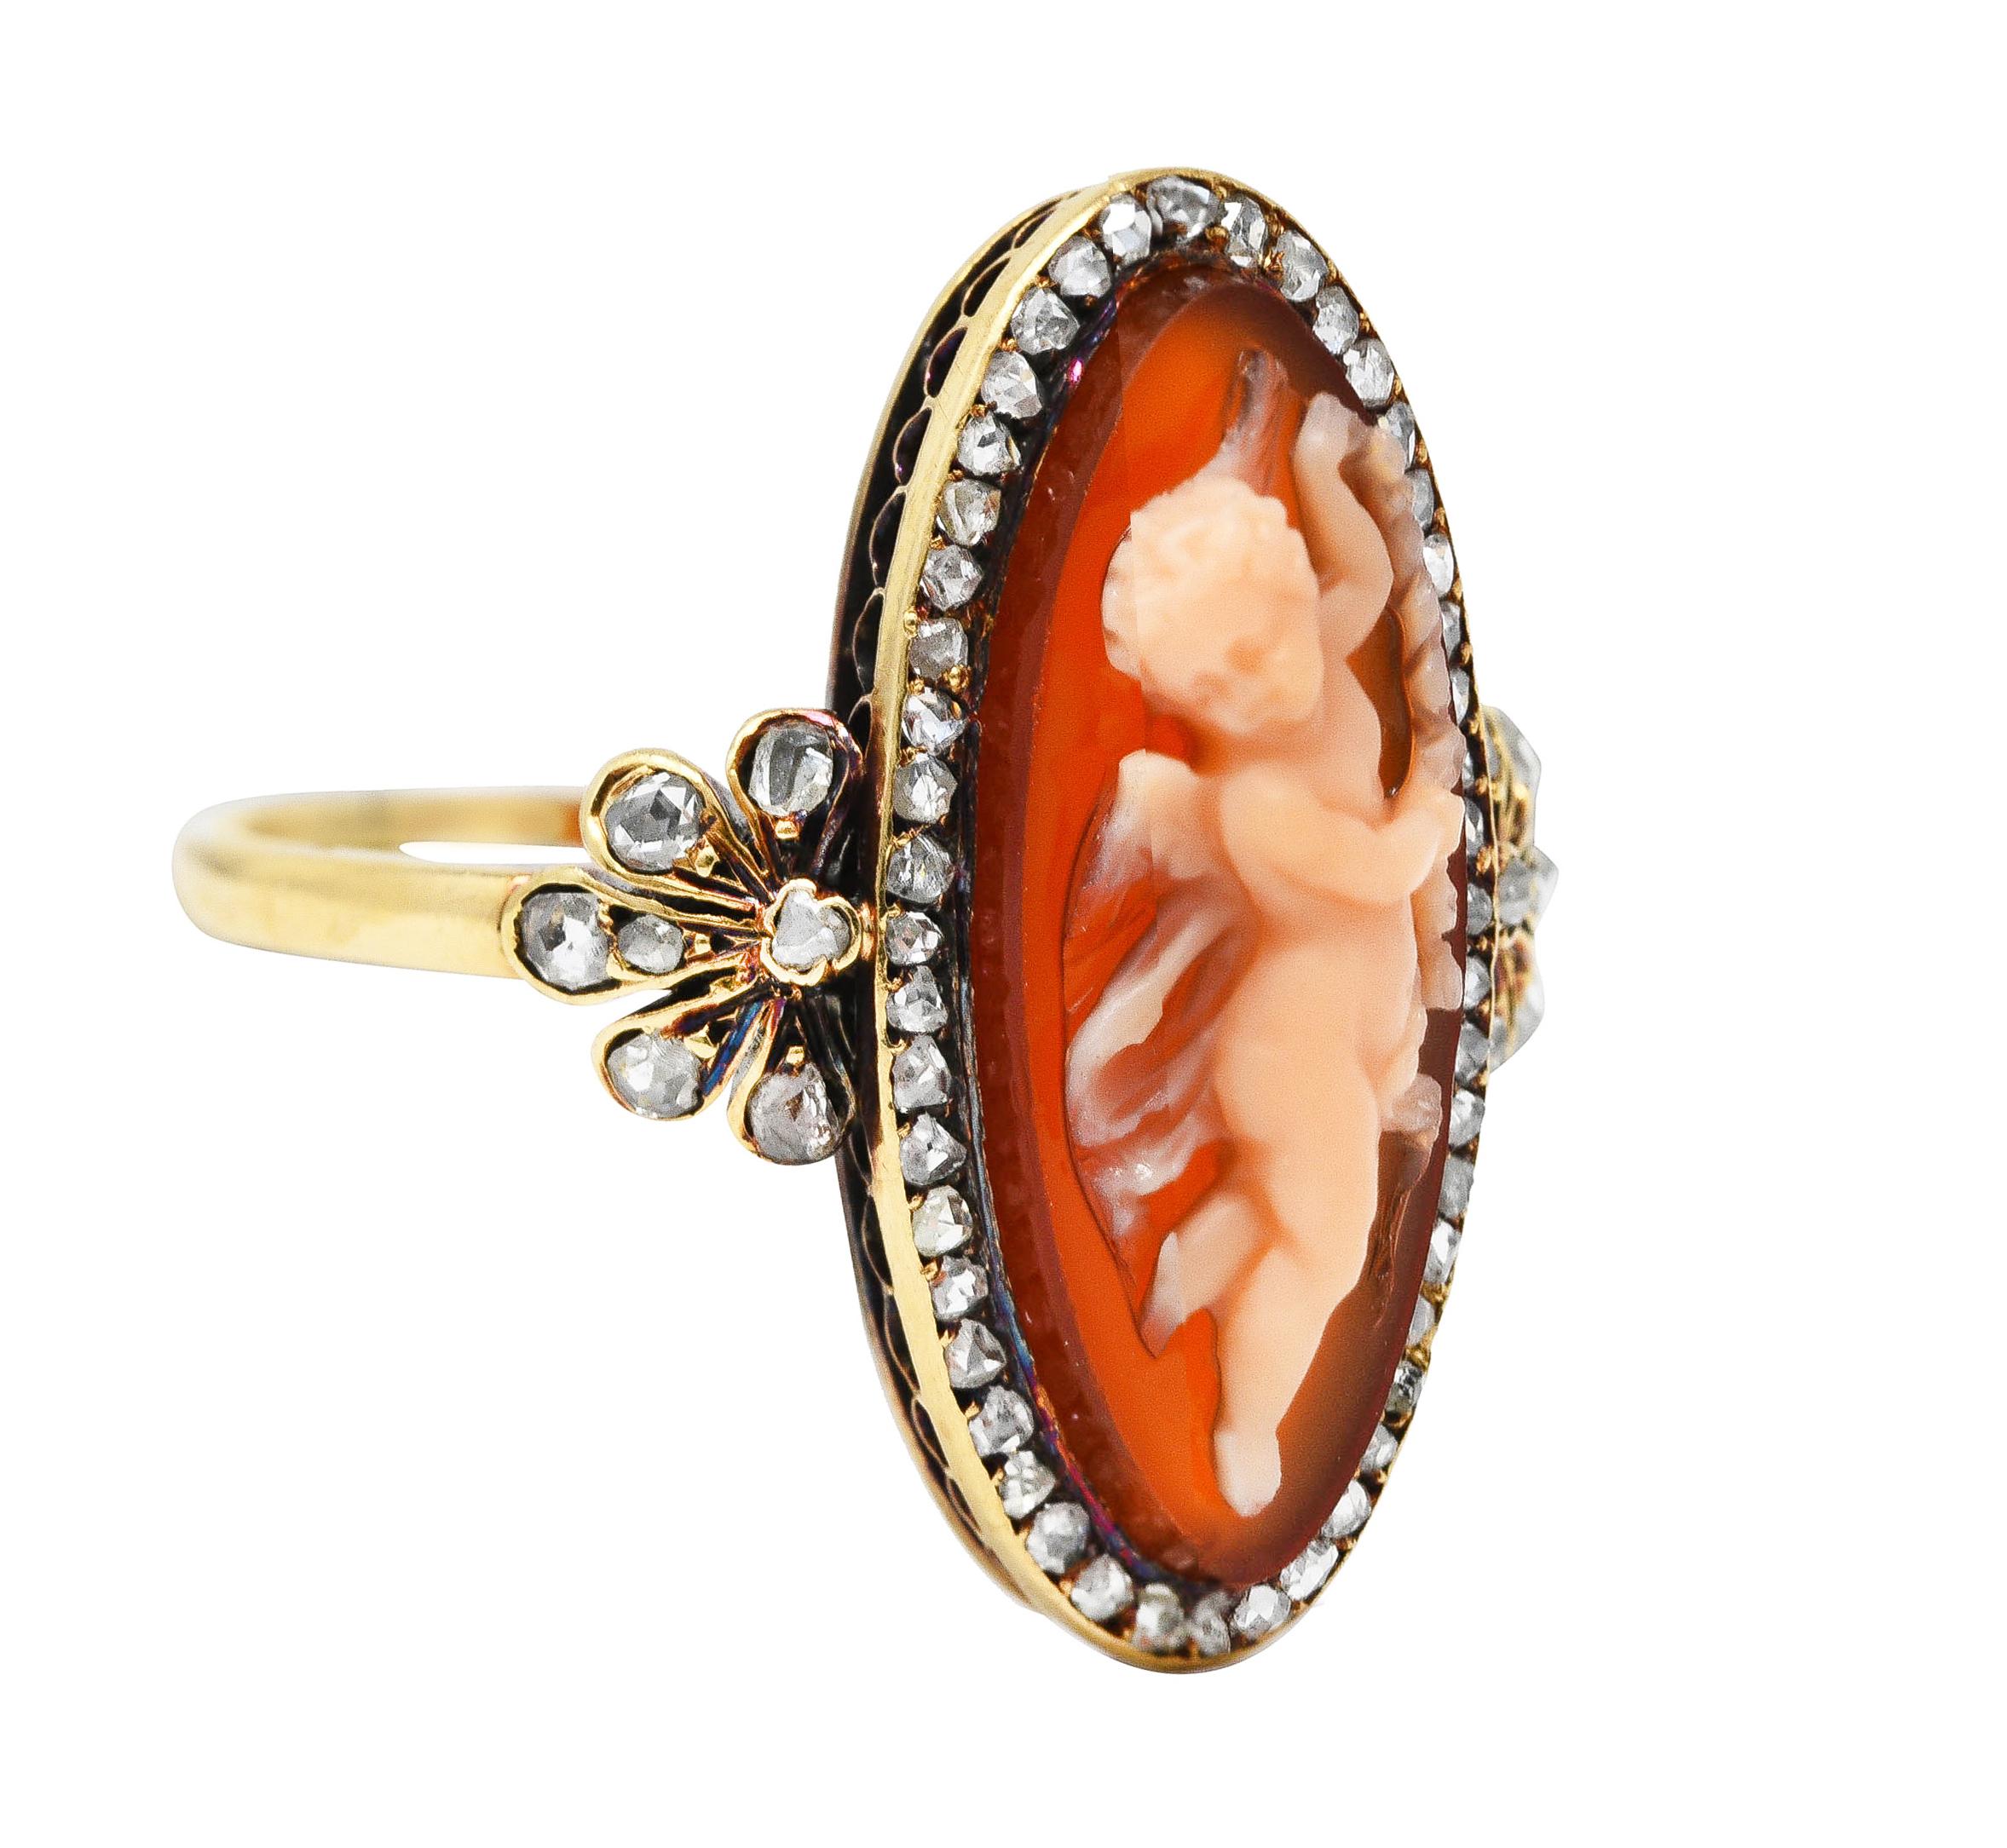 Centering an oval shaped tablet of carnelian carved to depict a winged Cupid holding a garland. Bezel set with a halo surround and foliate shoulder of bead set rose cut diamonds. Weighing approximately 0.72 carat total - quality consistent with cut